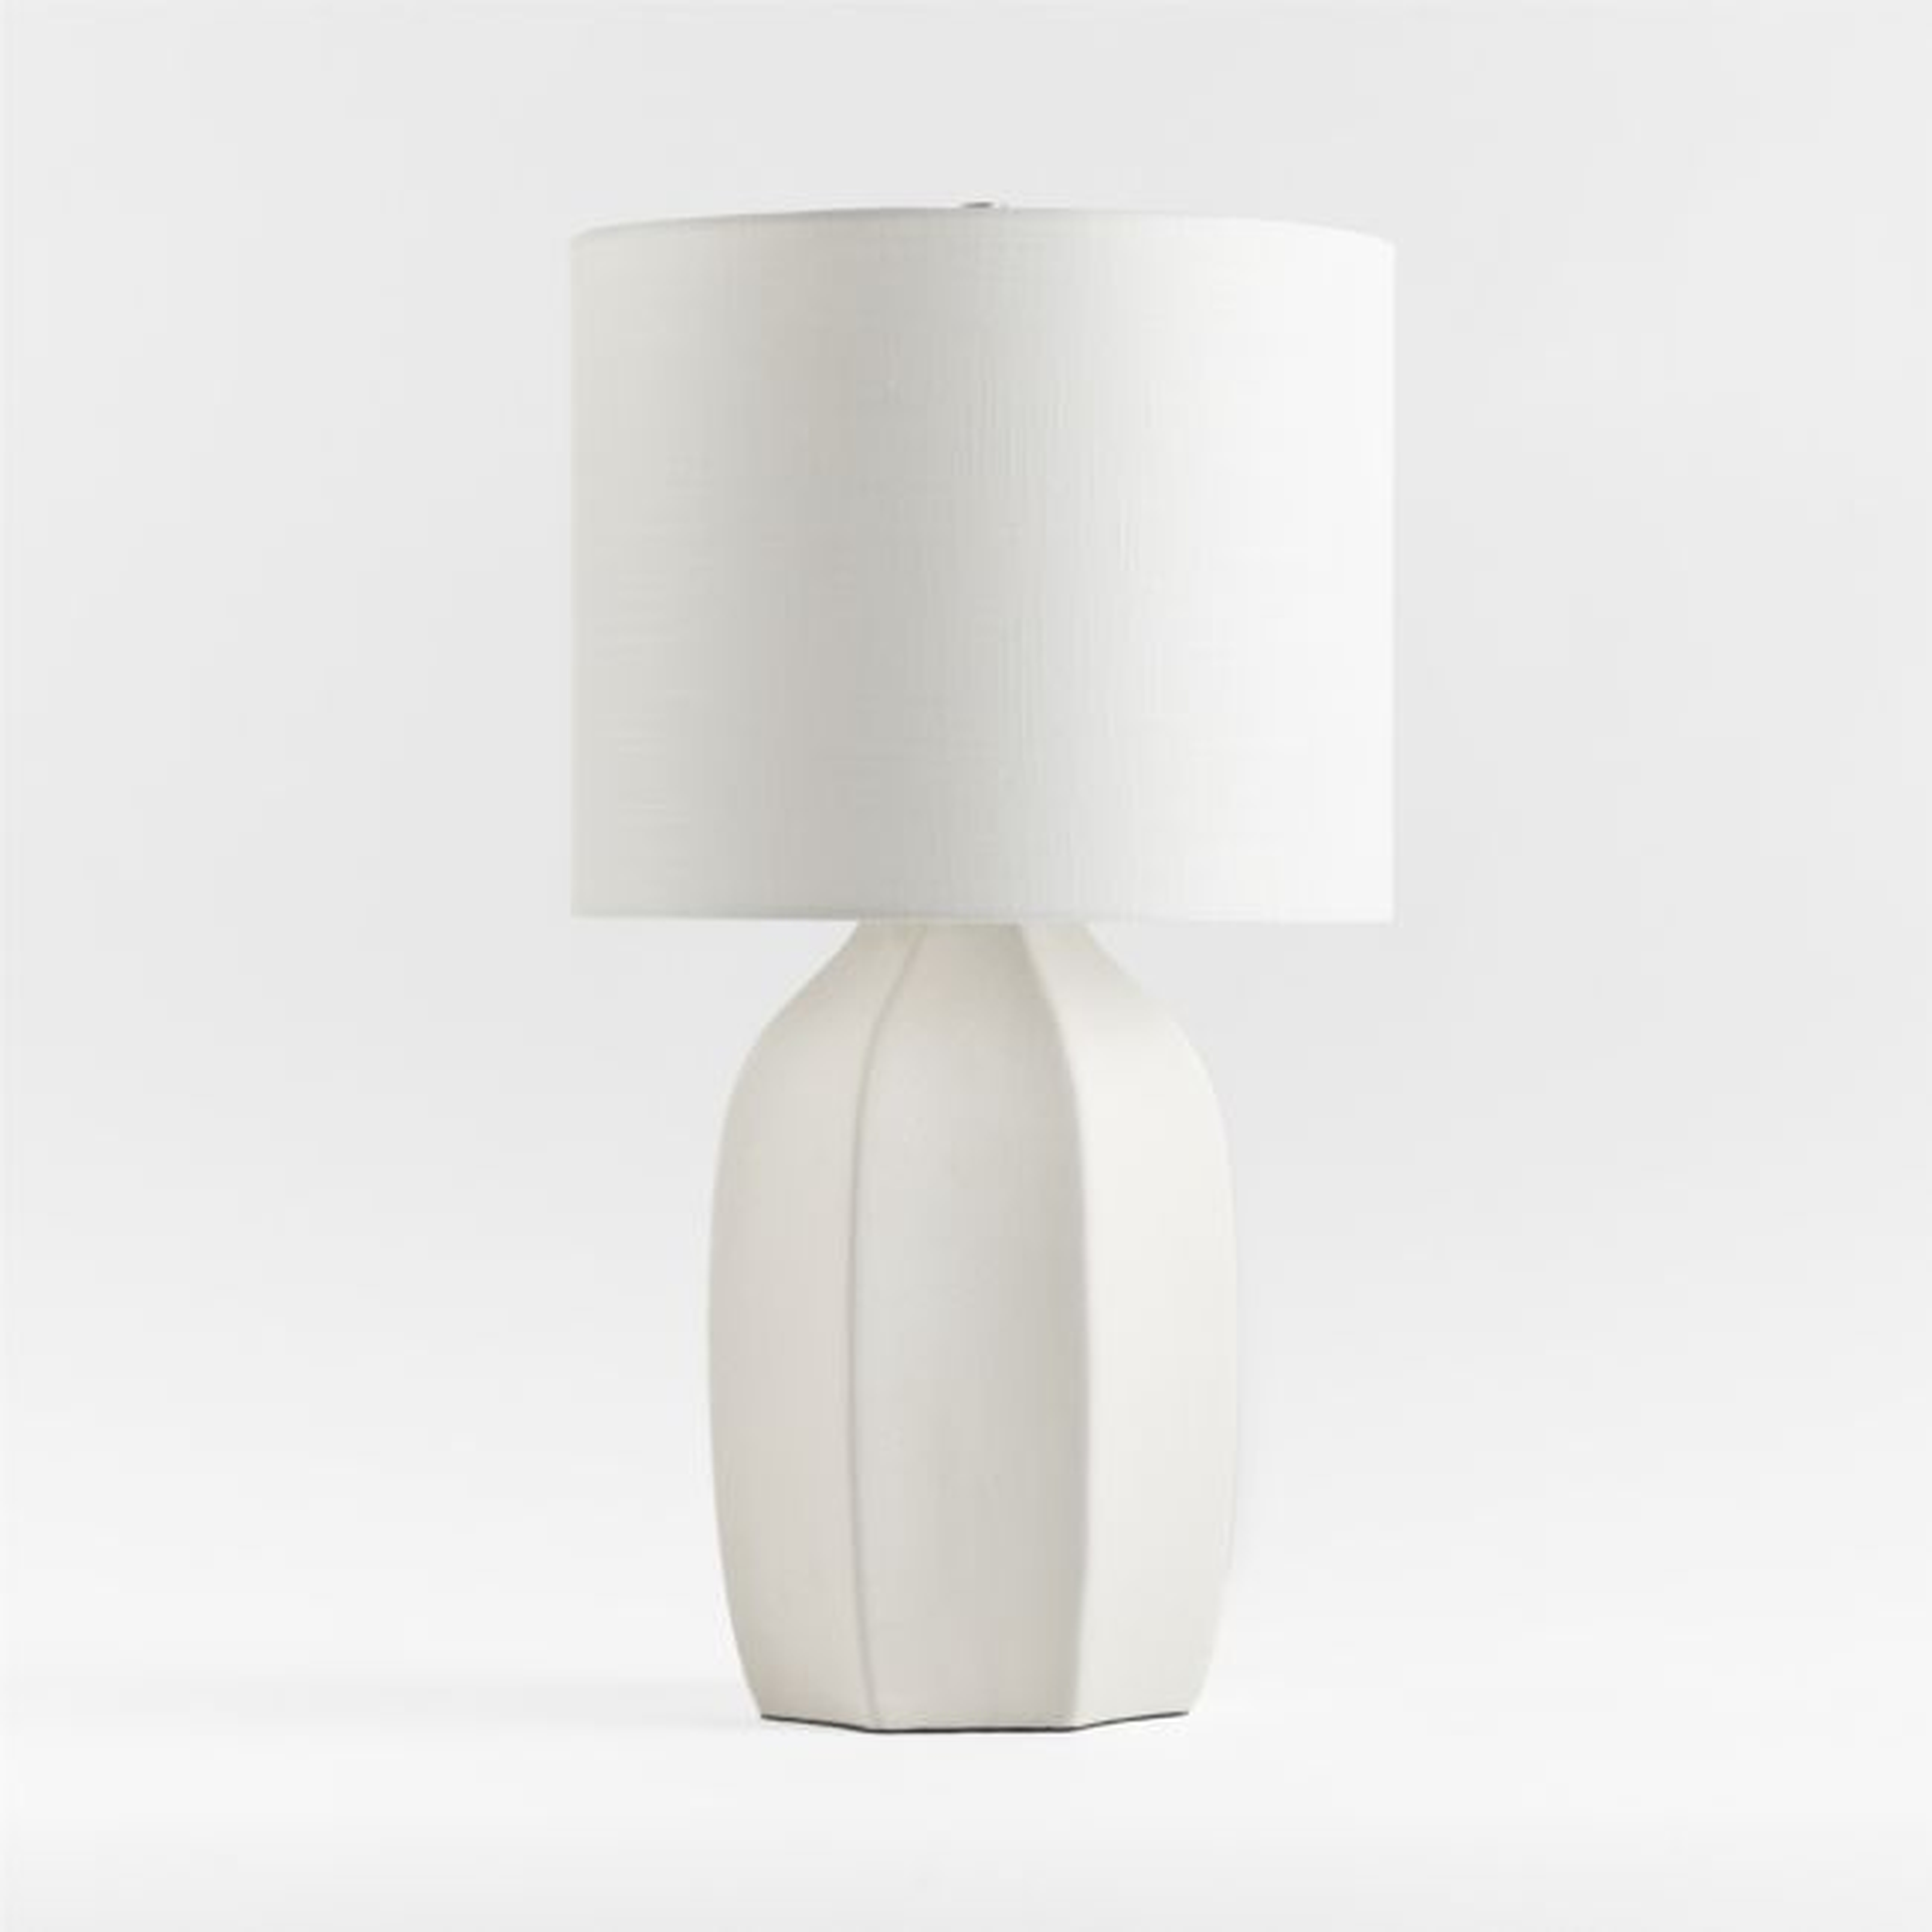 Amaryllis Small White Ceramic Table Lamp - Crate and Barrel